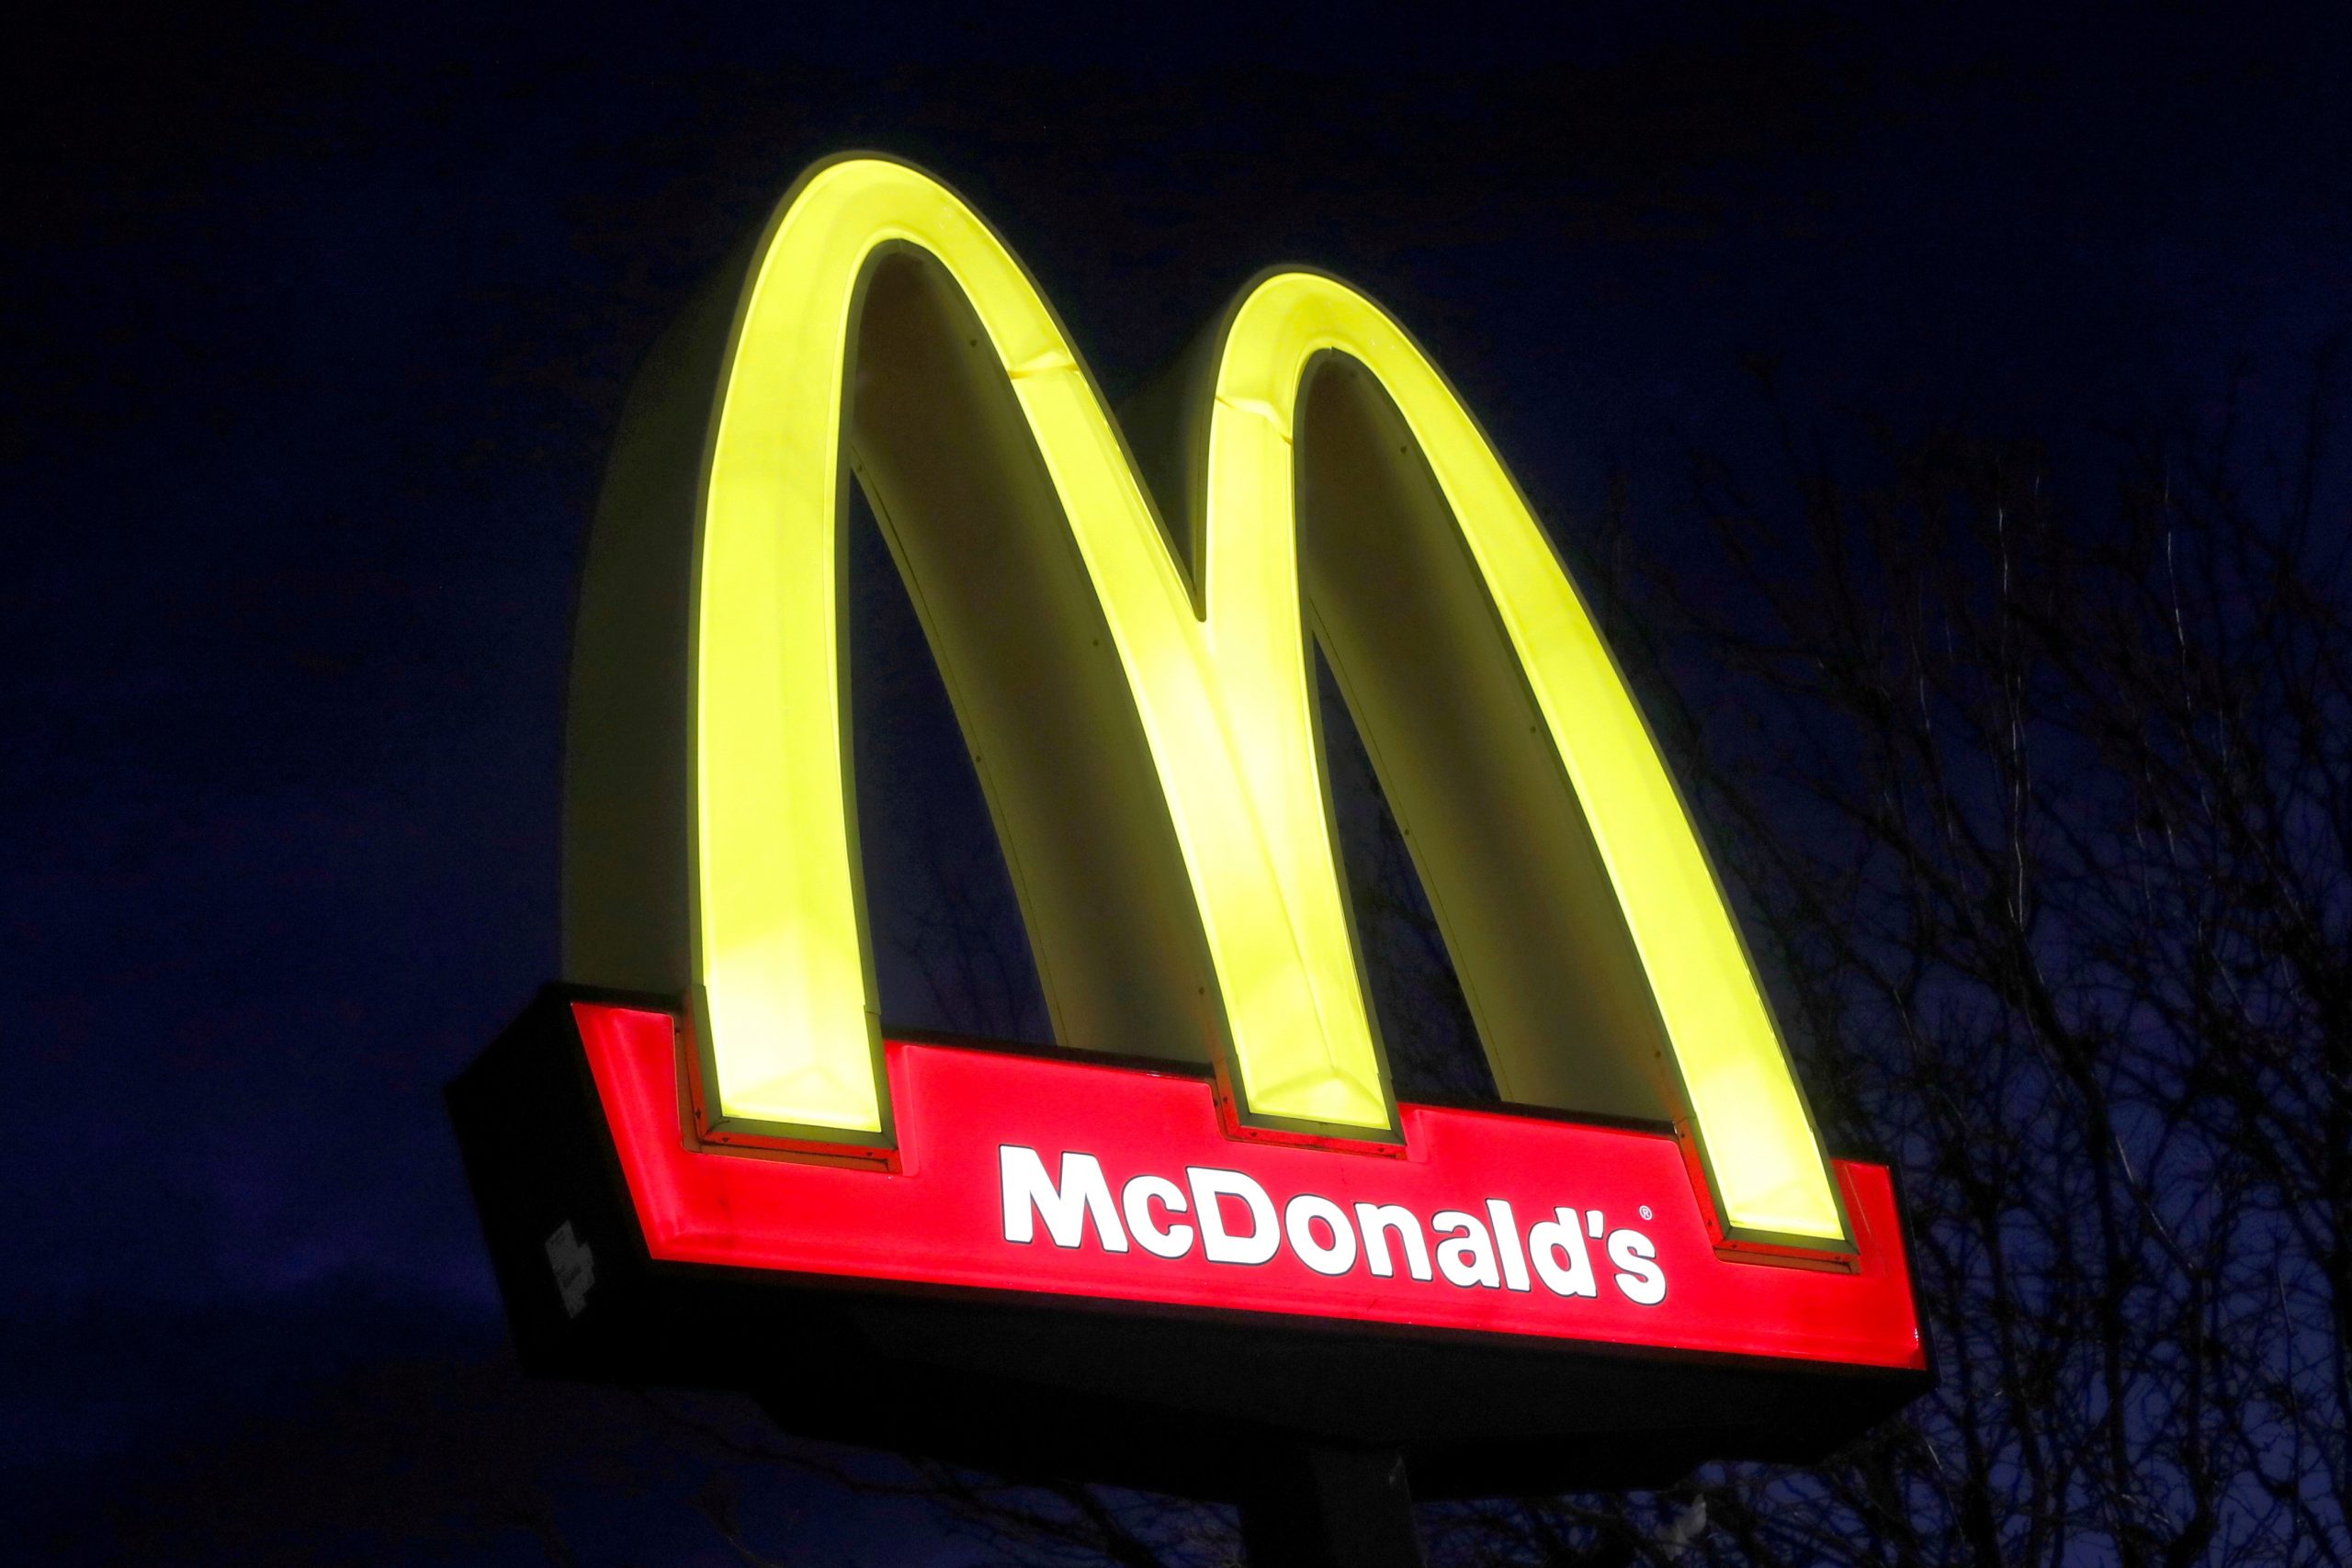  McDonald’s, others consider closing indoor seating amid Delta surge in U.S.